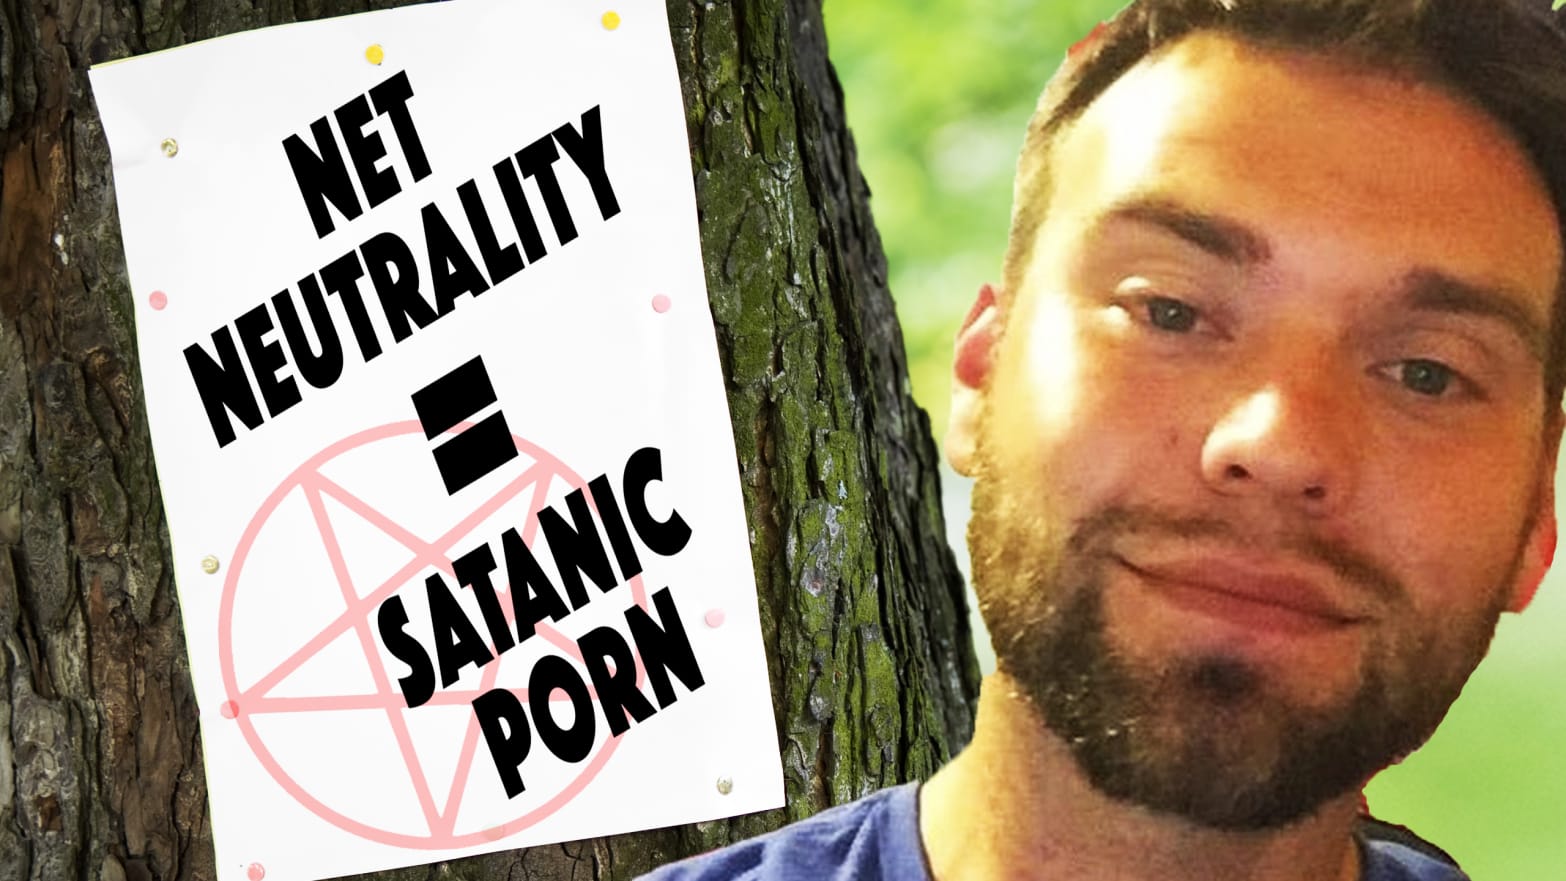 Fake Snuff Porn - Alt-Right Claims Net Neutrality Promotes 'Satanic Porn' in ...